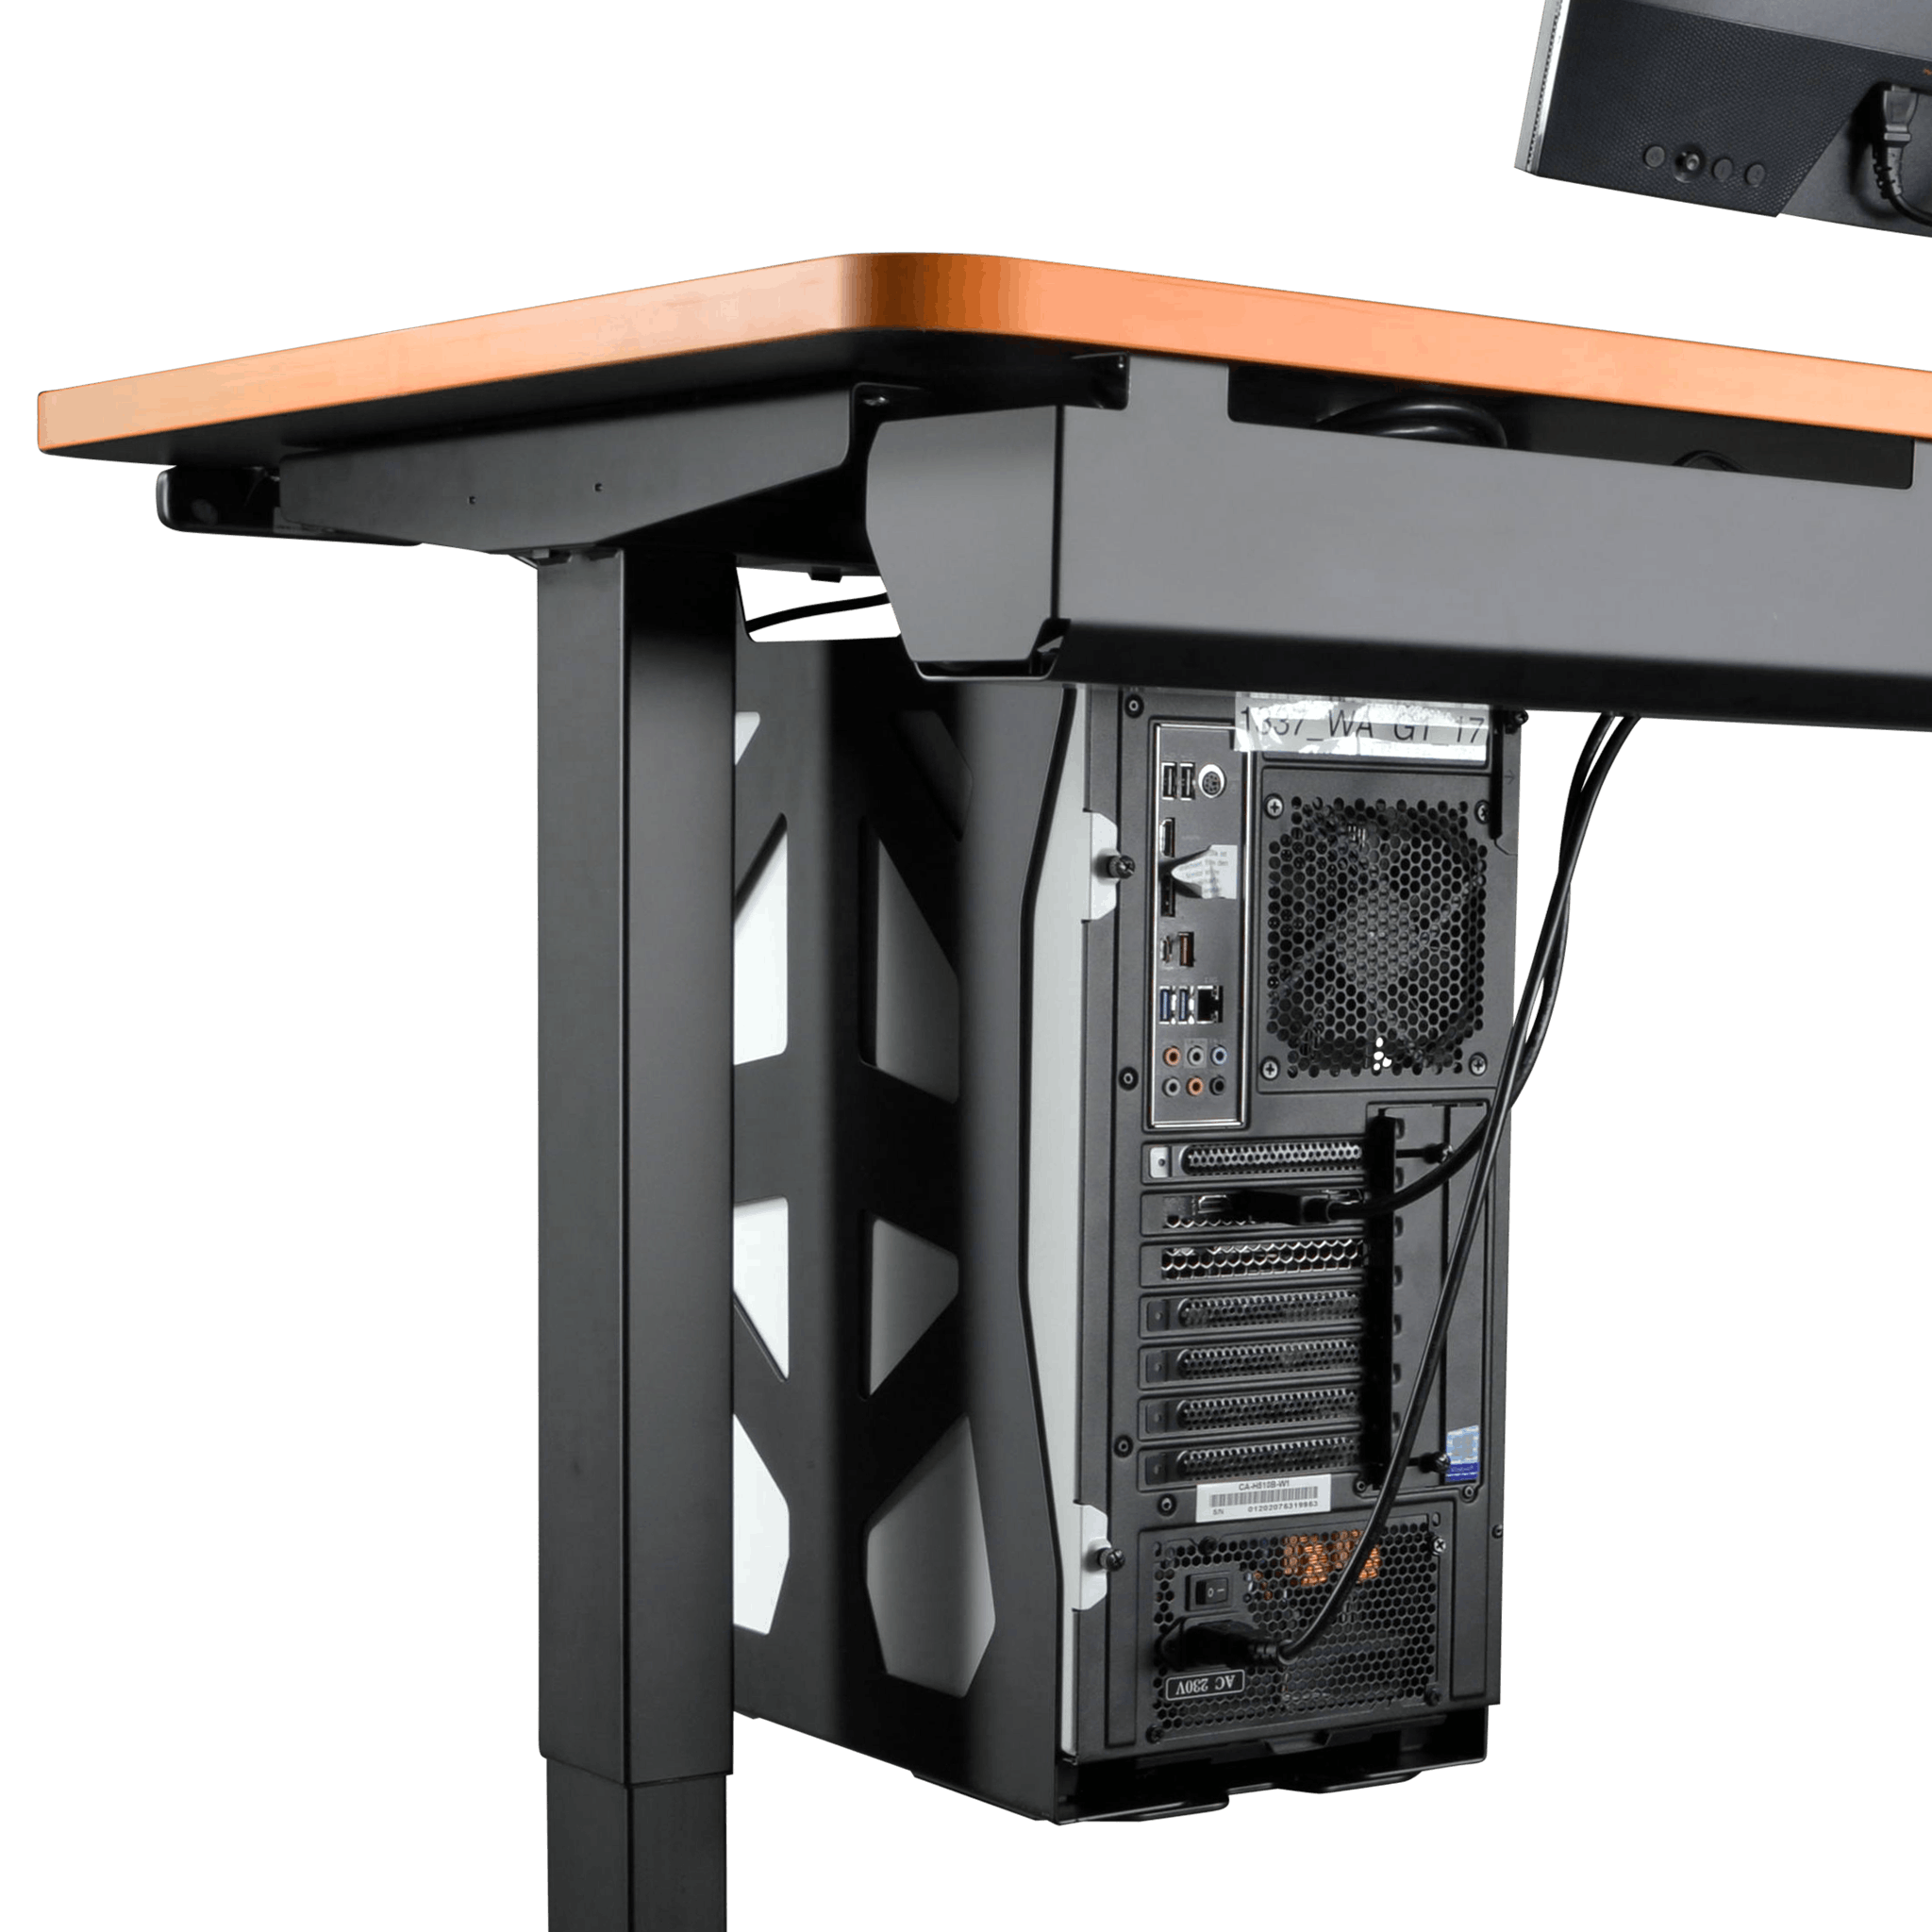 The LeetDesk Cable management tray is easy to assemble